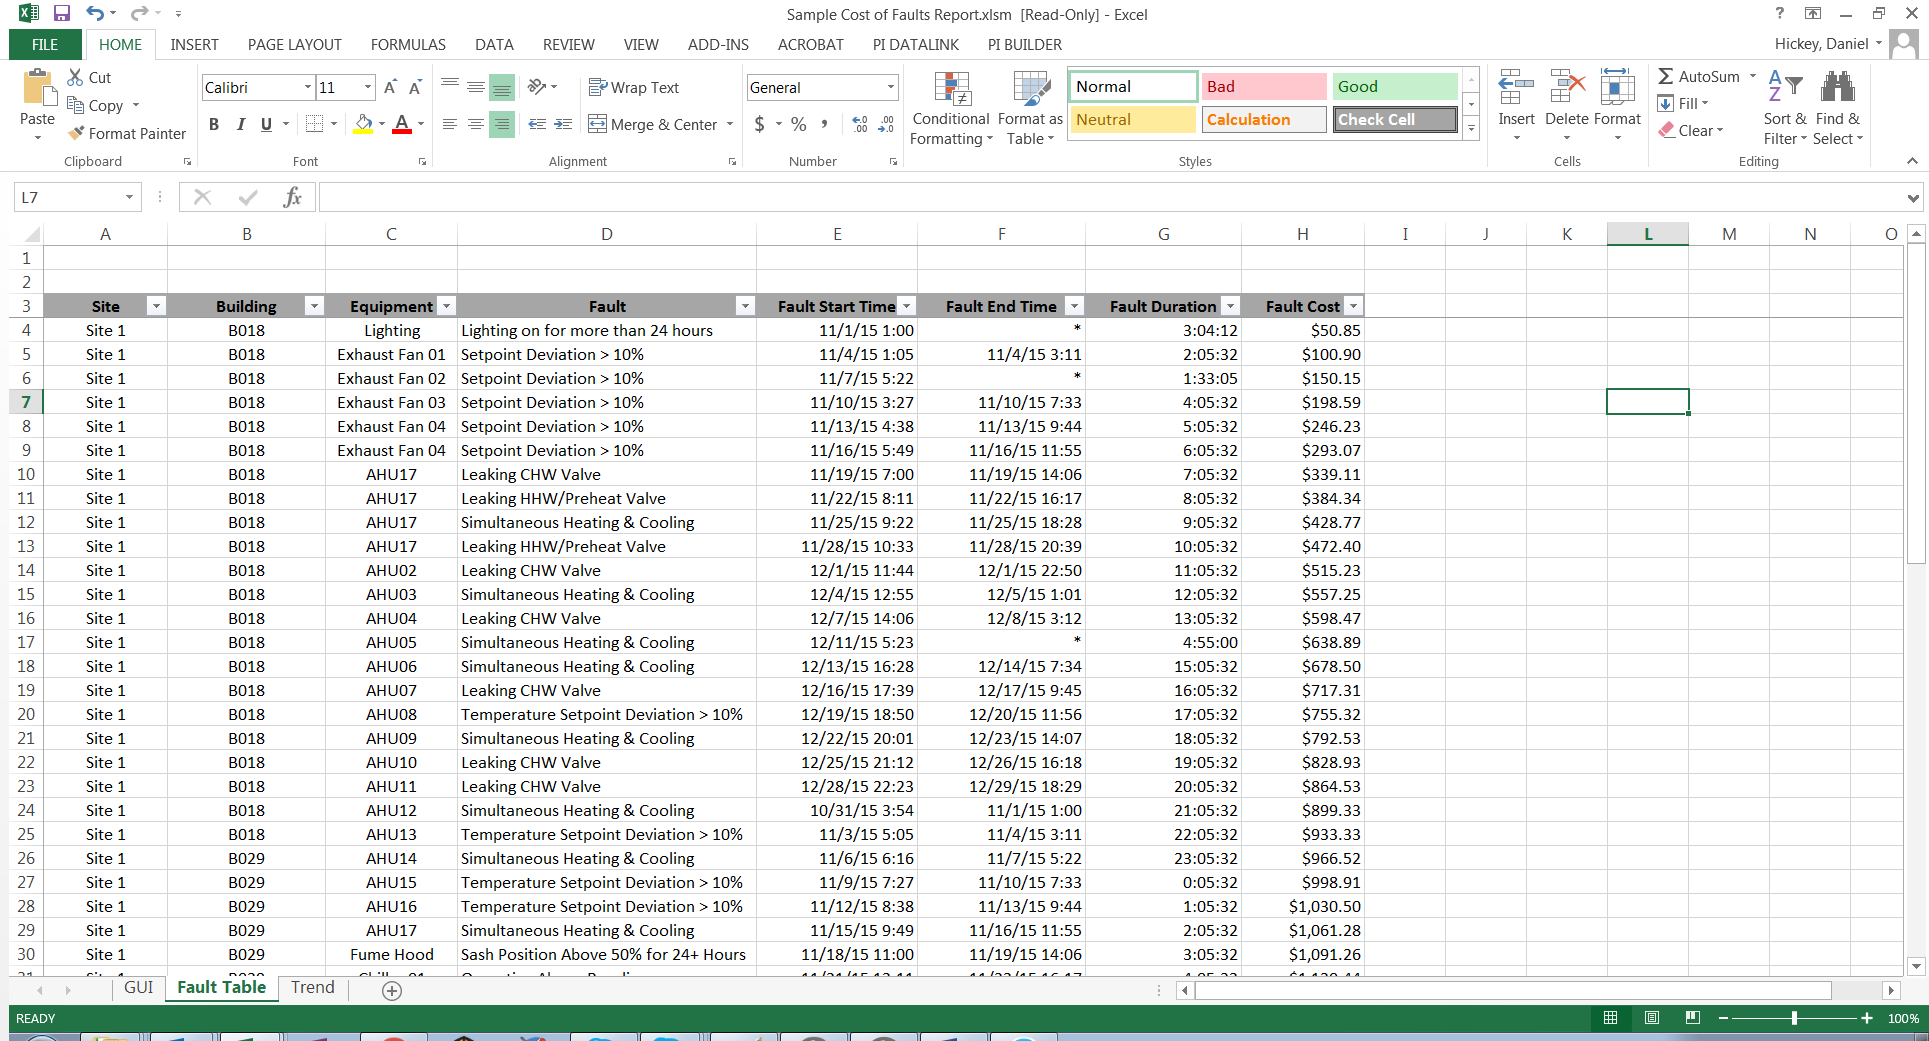 Excel Based Fault Cost Report